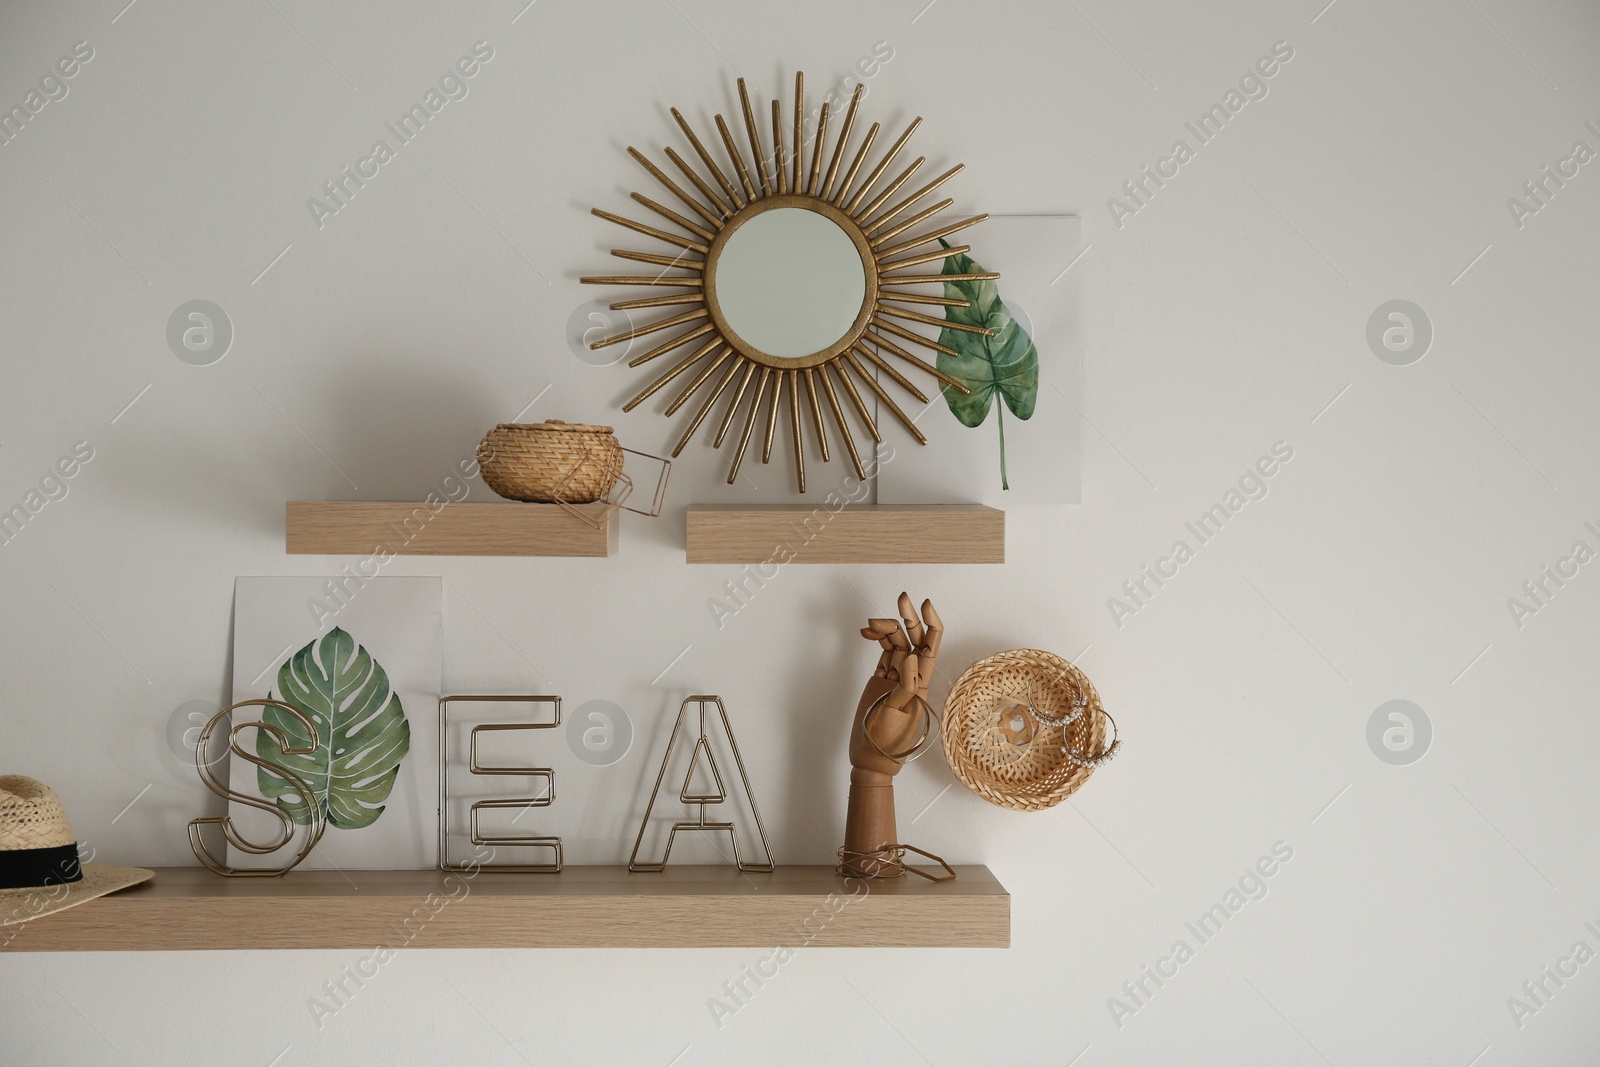 Photo of Wooden shelves with women's accessories and different decorative elements on light wall. Space for text